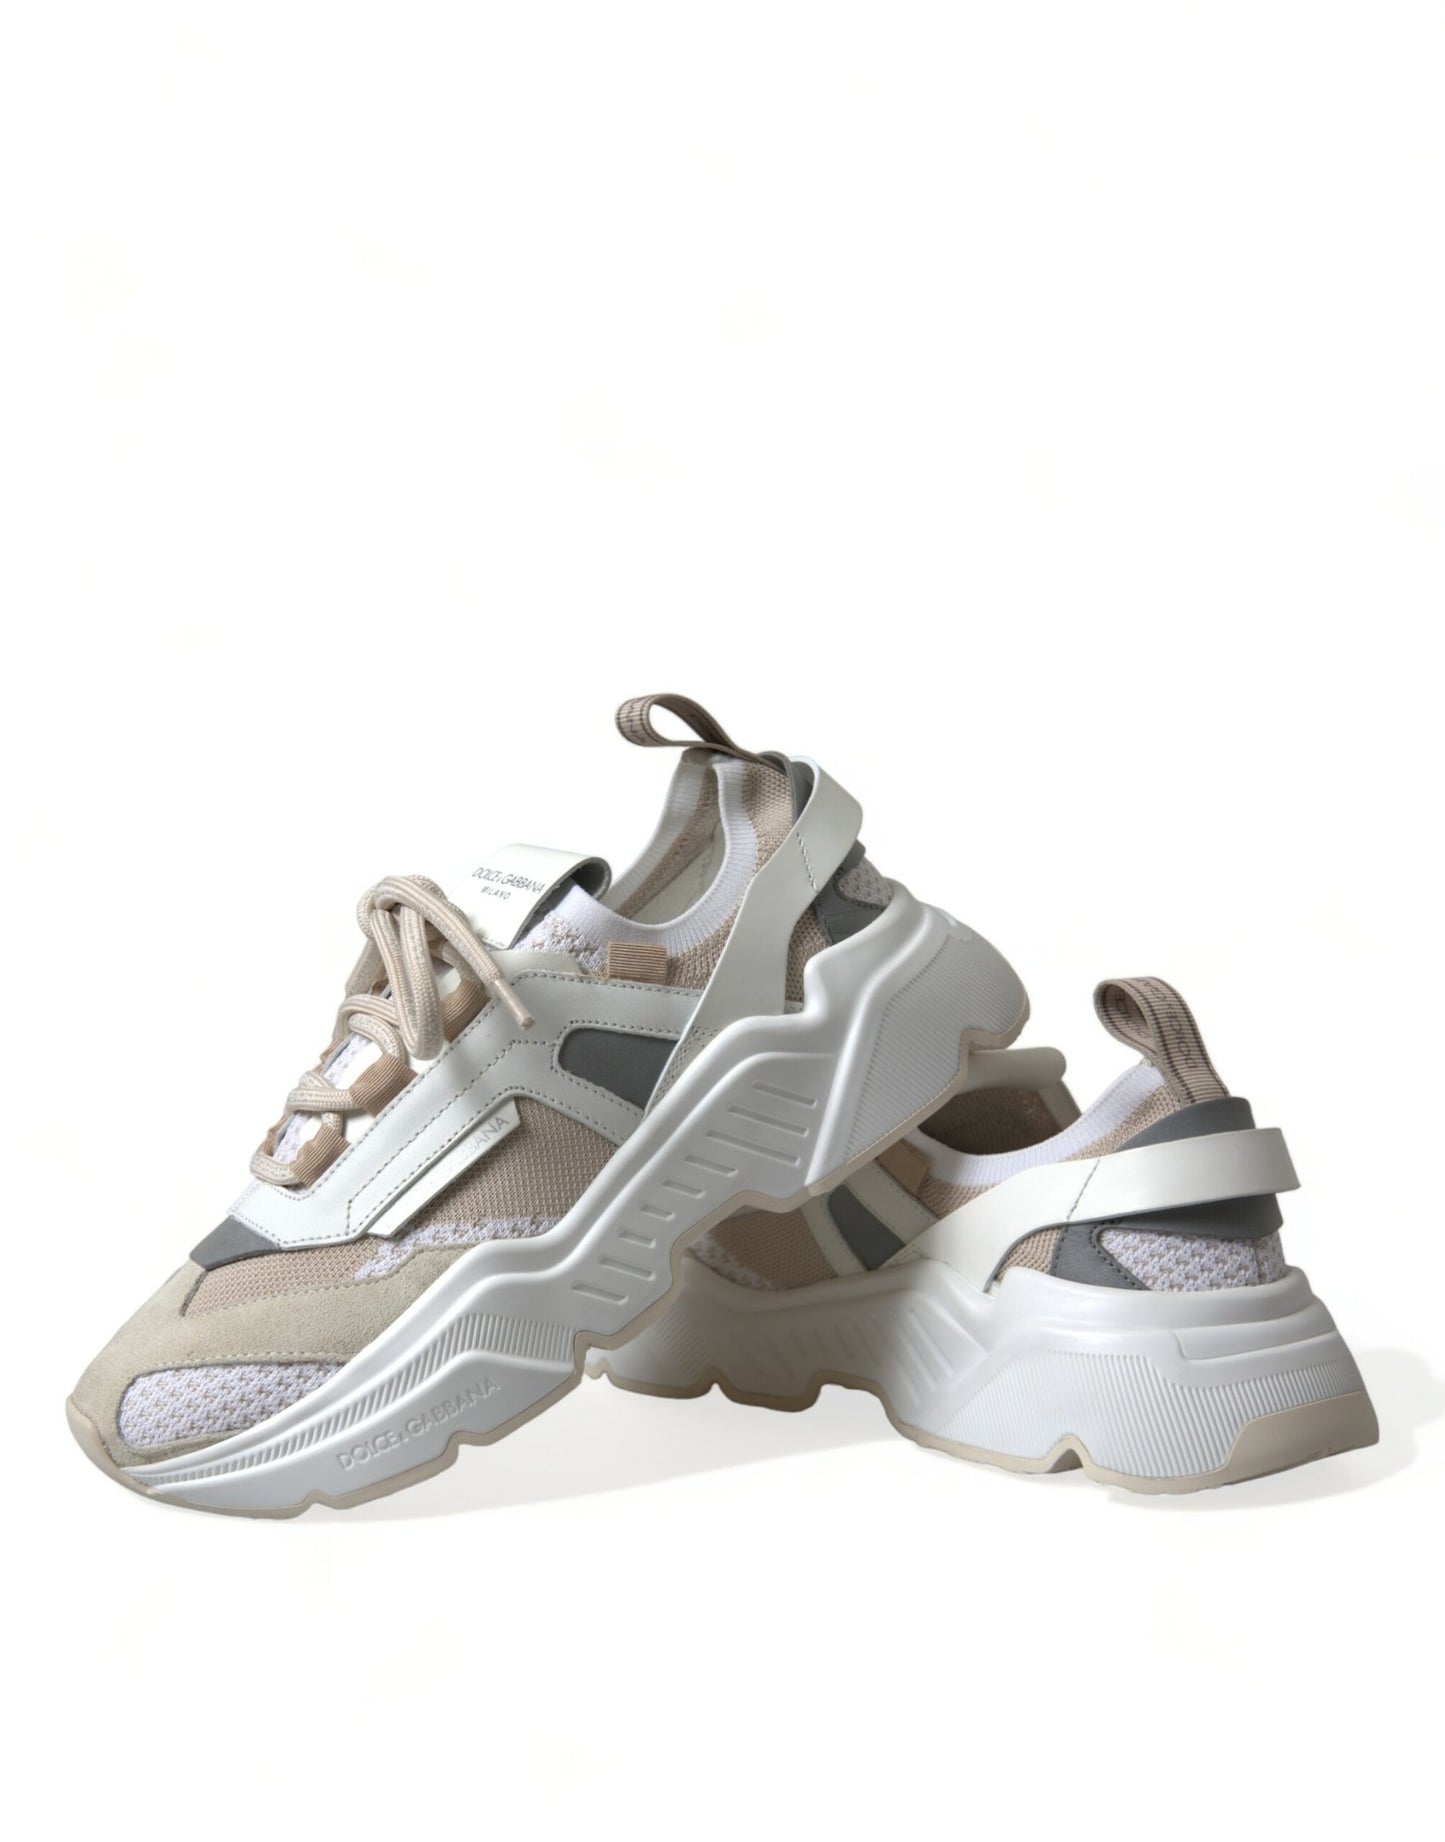 Dolce & Gabbana Beige White Daymaster Low Top Leather Sneakers Shoes - DEA STILOSA MILANO